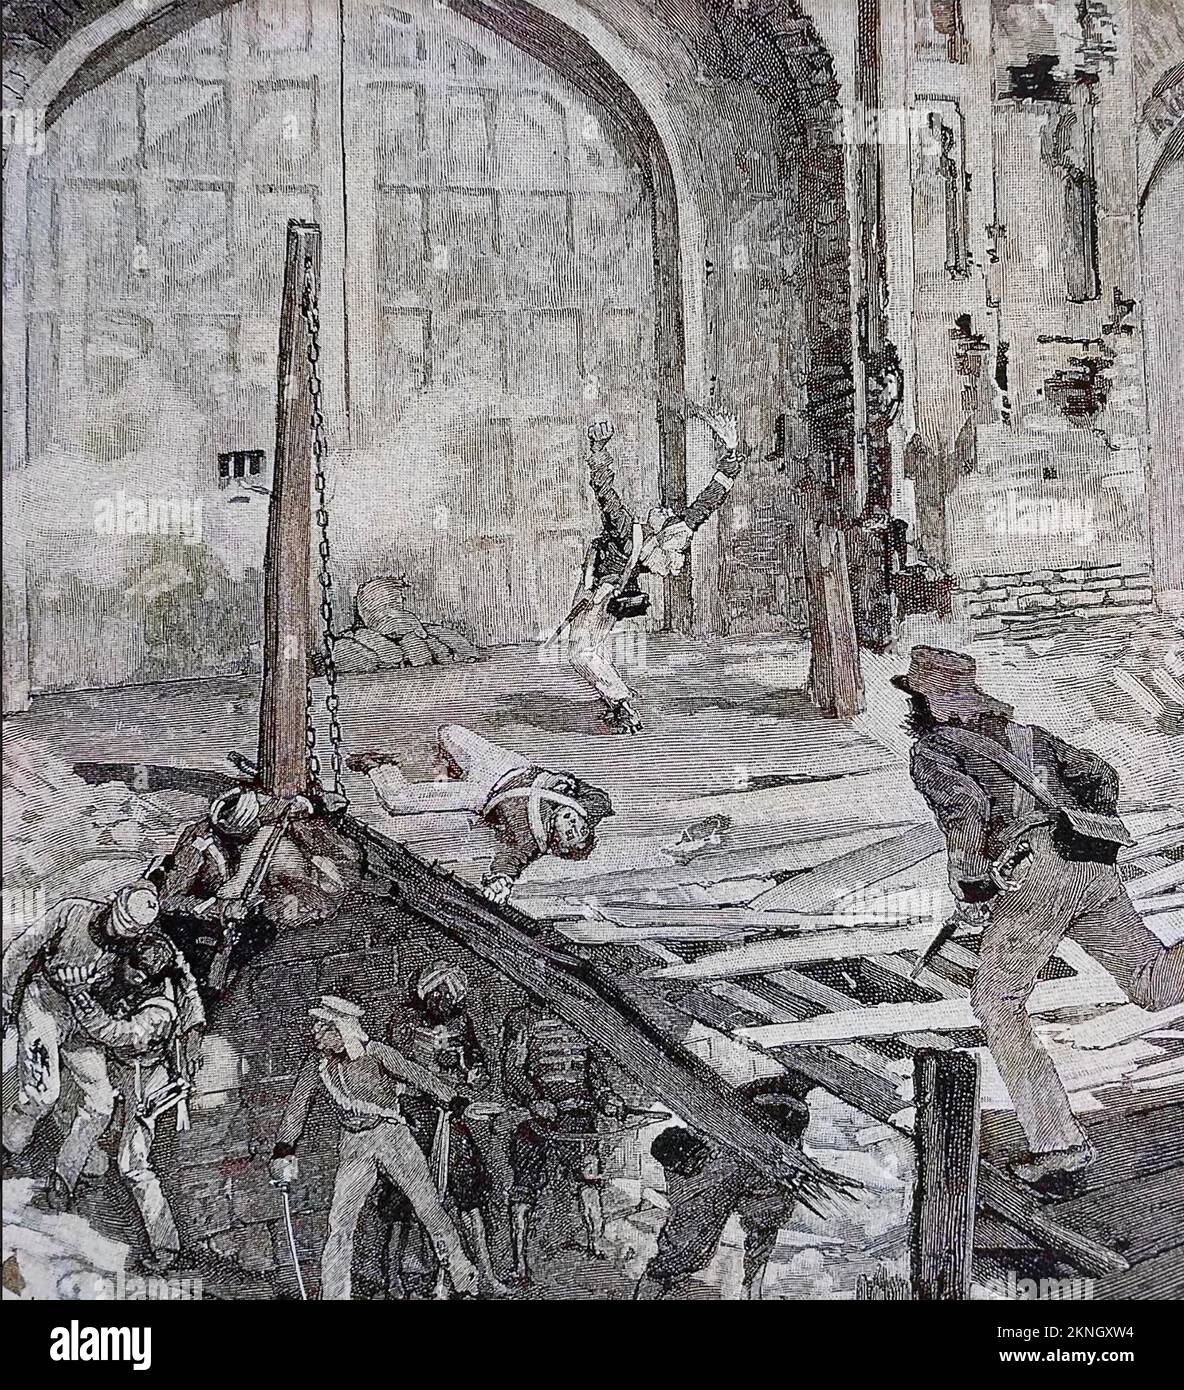 INDIAN MUTINY 1857. British troops blow up the Cashmere Gate in Delhi on 14th September.  Lieutenant Duncan Charles Home and Philip Salkeld of the Bengal Engineers are killed. Both were awarded posthumous VCs. Stock Photo